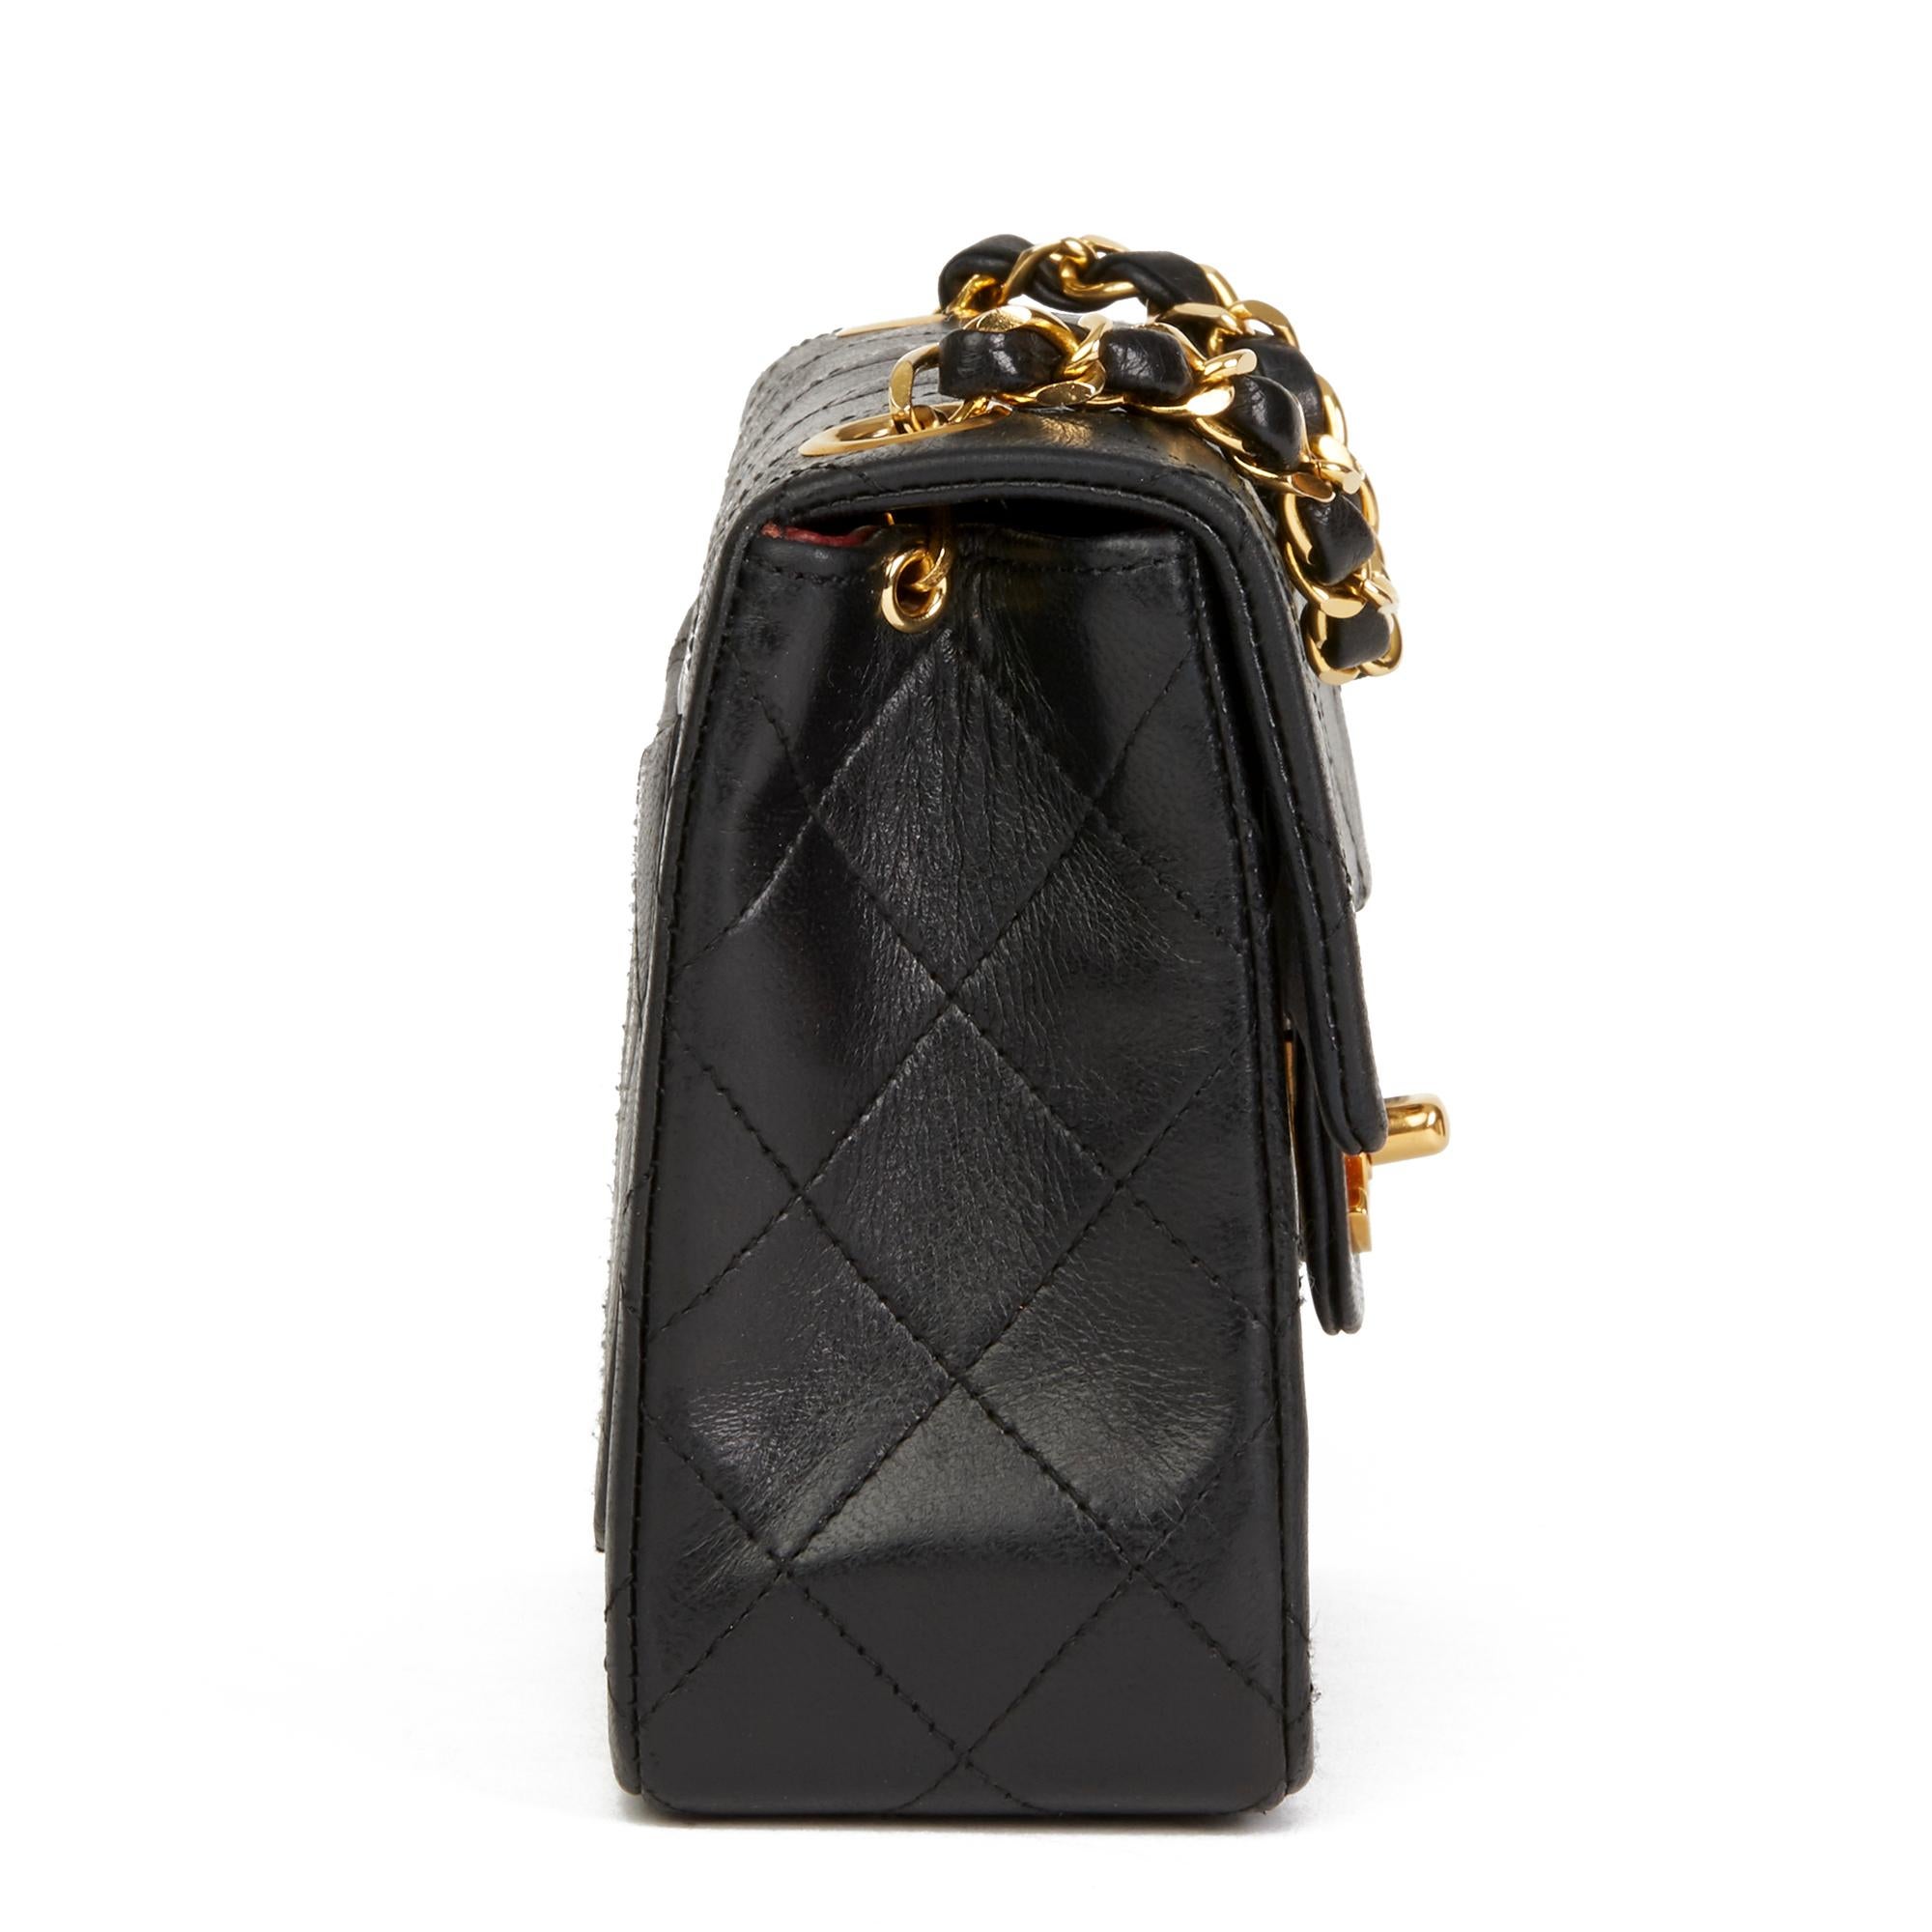 CHANEL
Black Quilted Lambskin Vintage Mini Flap Bag

Reference: HB2599
Serial Number: 0787572
Age (Circa): 1989
Accompanied By: Chanel Dust Bag, Box
Authenticity Details: Serial Sticker (Made in France)
Gender: Ladies
Type: Crossbody,